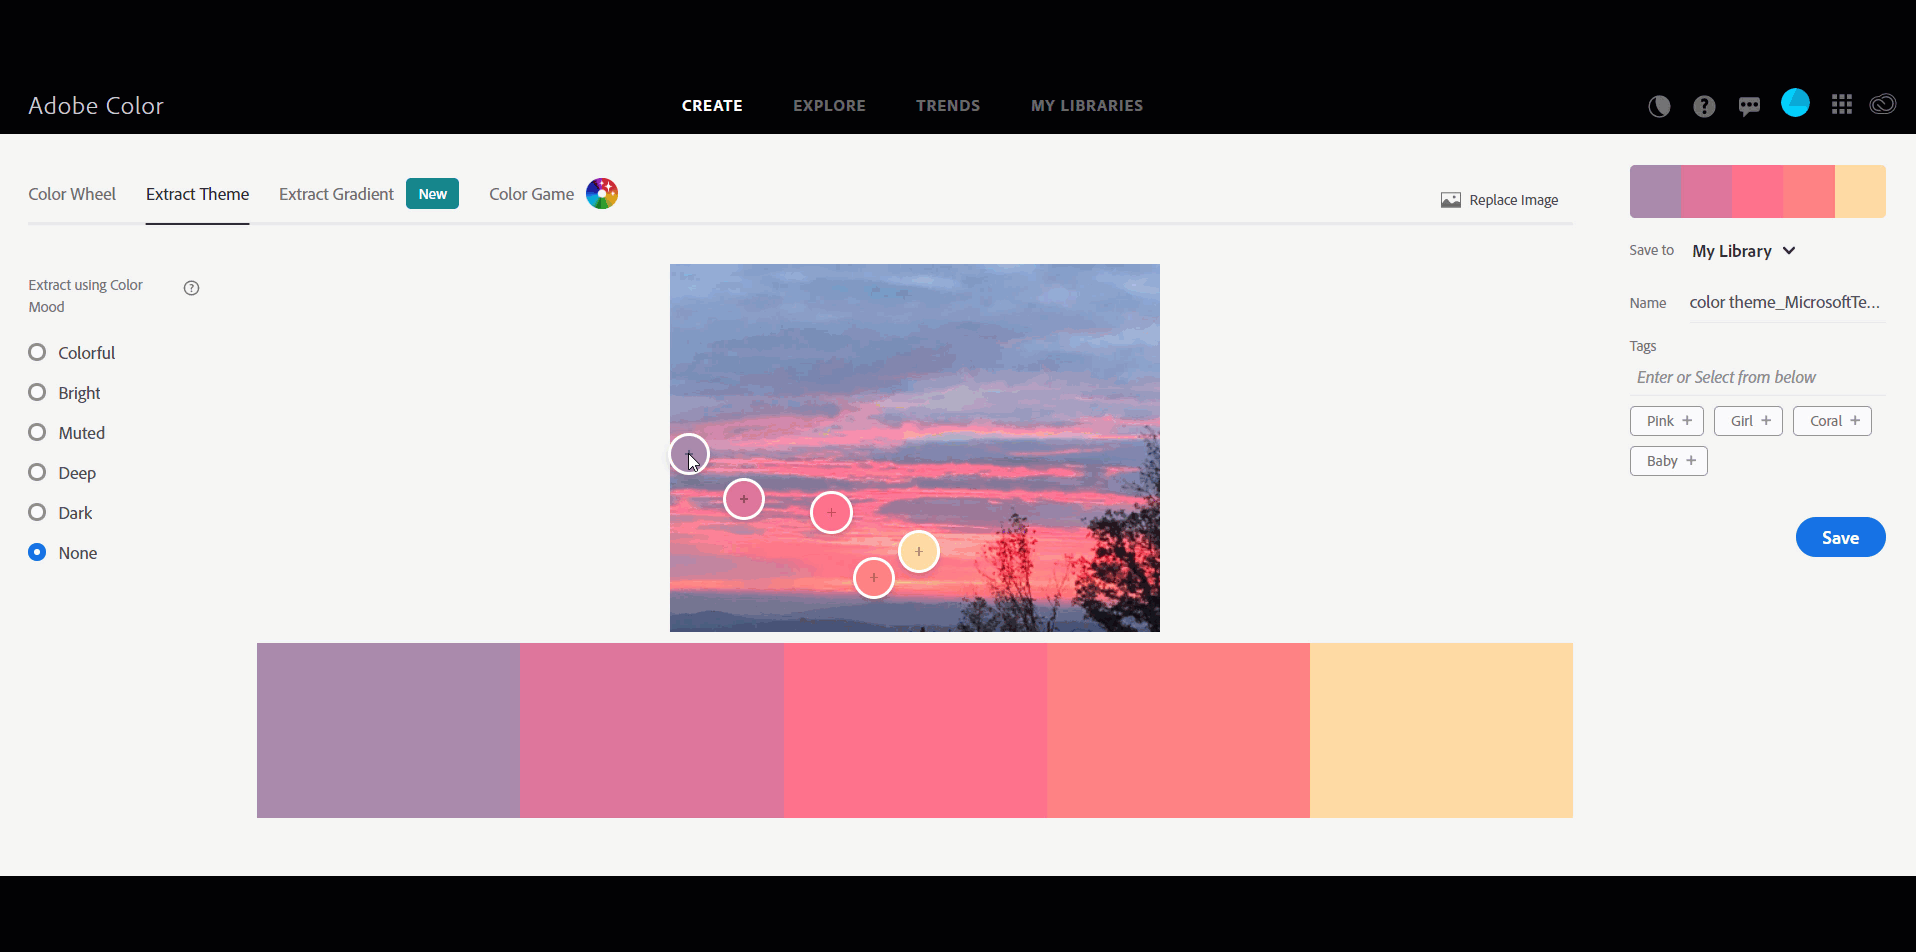 Use of Adobe Color tool with a sunset image.